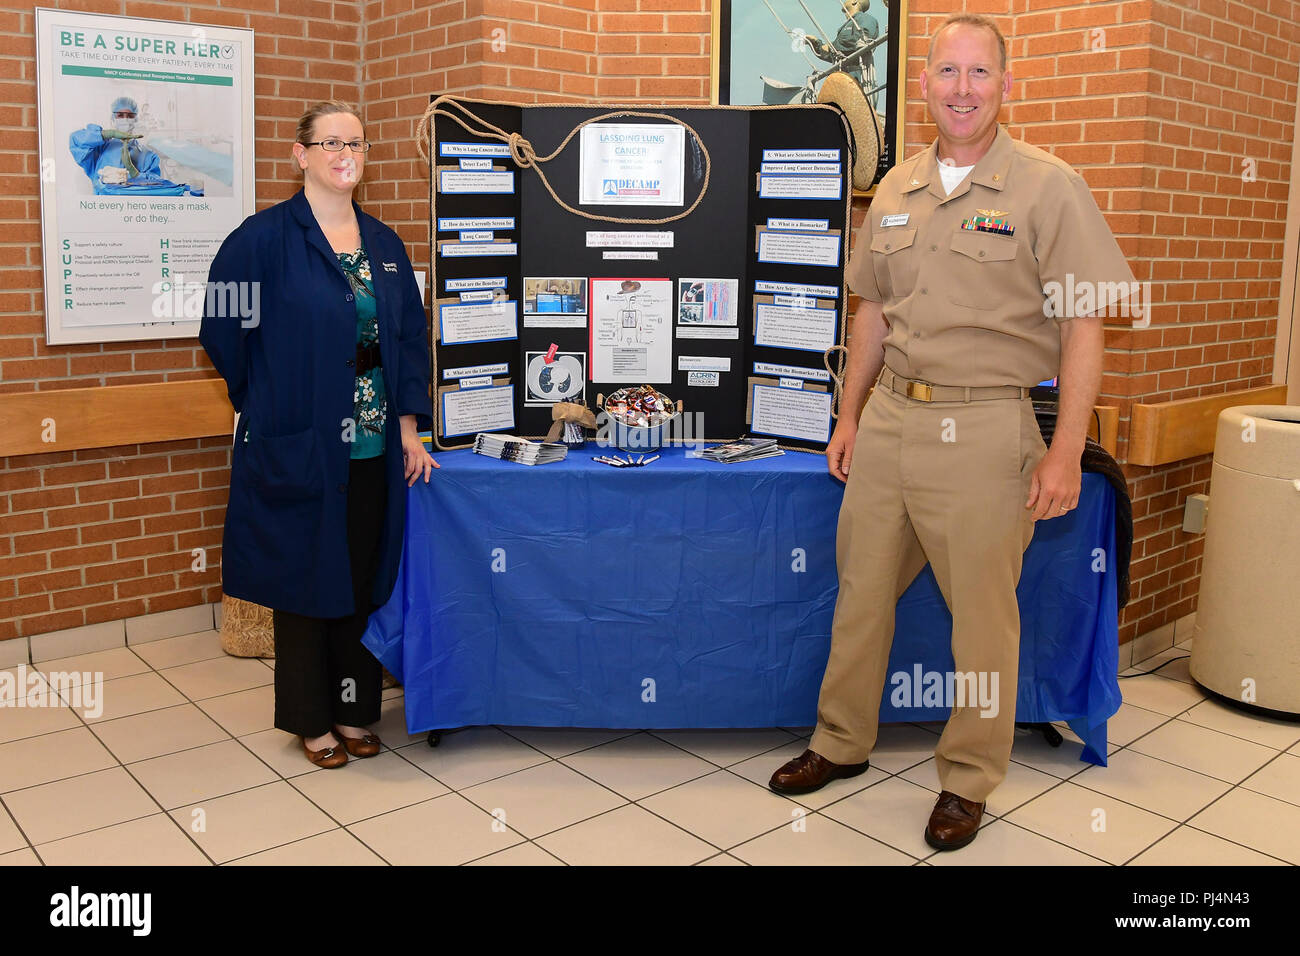 180830-N-IY469-002 – Holly LaPerriere and Capt. Chris Kuzniewski set up a booth to promote their research on lung cancer. LaPerriere is a research nurse and coordinator and Kuzniewski is the primary investigator for Detection of Early Lung Cancer Among Military Personnel (DECAMP). Stock Photo